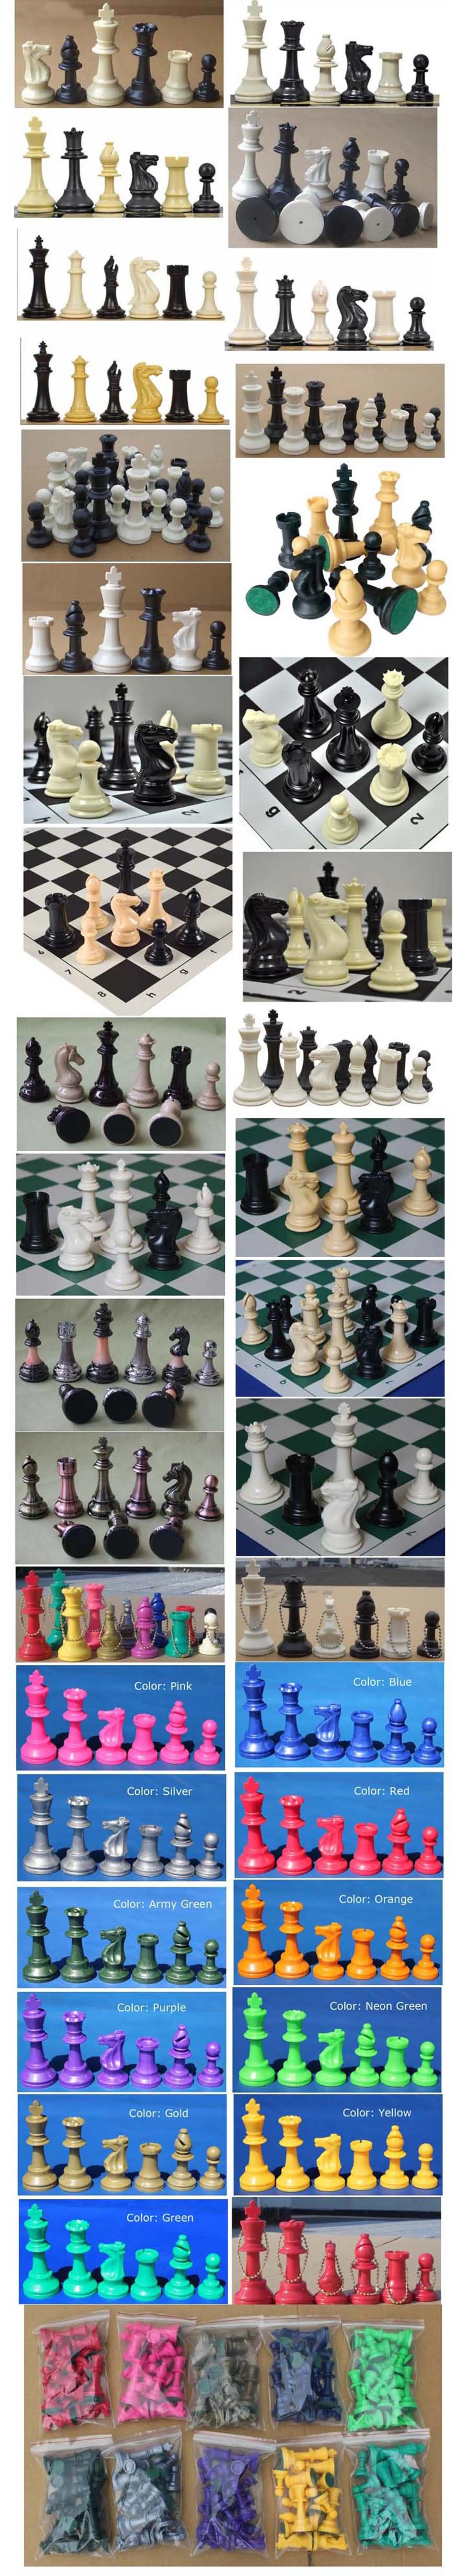 Full Set Army Green and Purple Staunton Triple Weighted Chess Pieces 